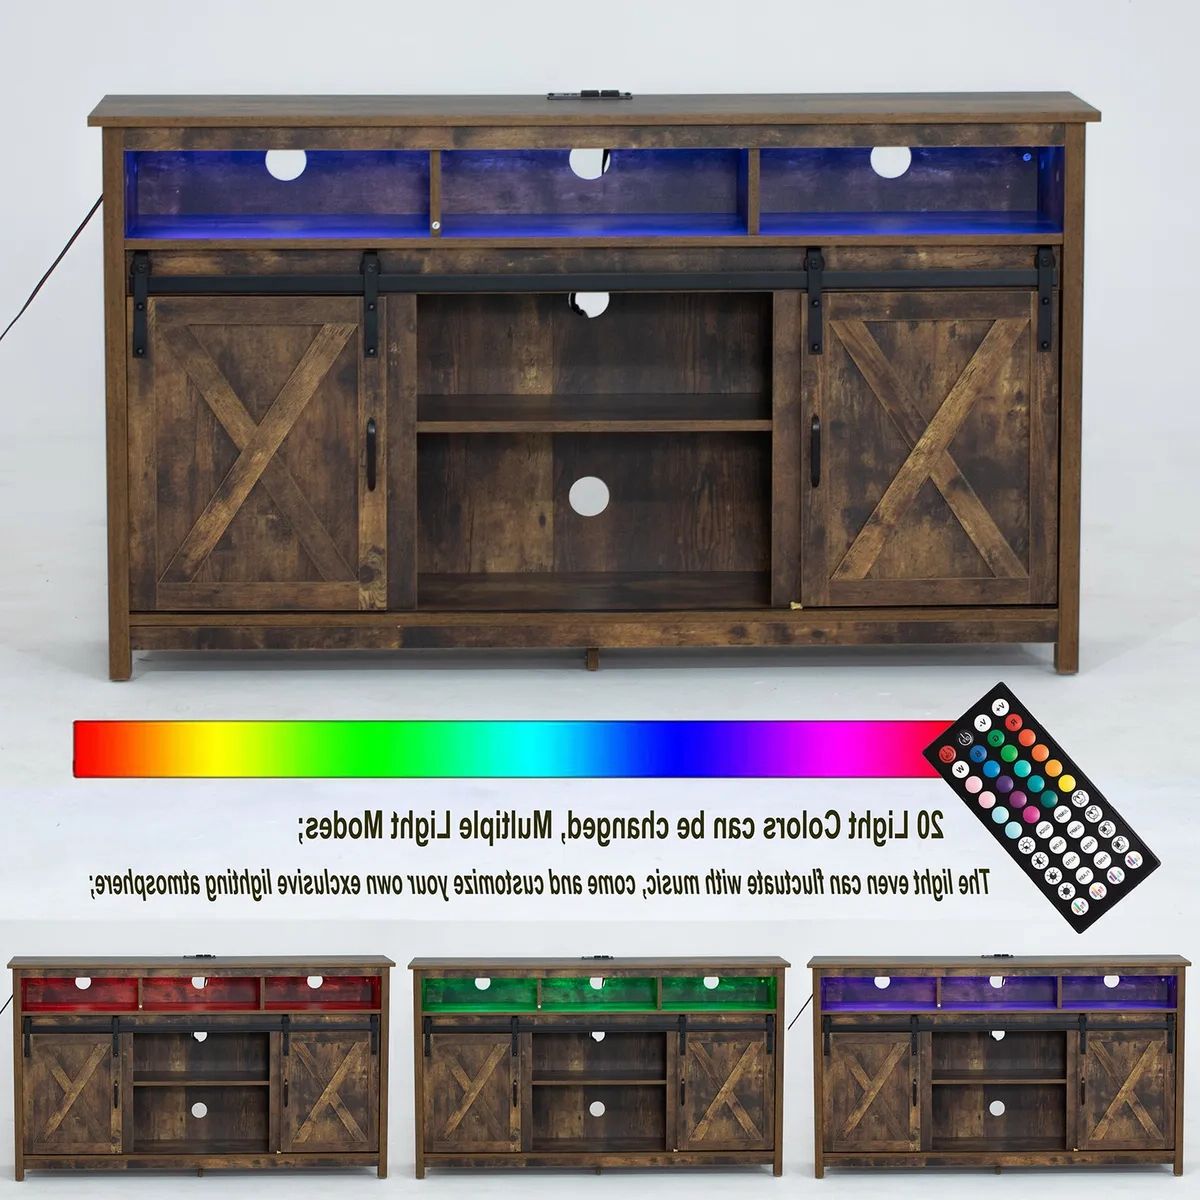 Farmhouse Led Coffee Bar Cabinet Barn Door Sideboard Buffet With Power  Outlet | Ebay For Sideboards With Power Outlet (Gallery 4 of 20)